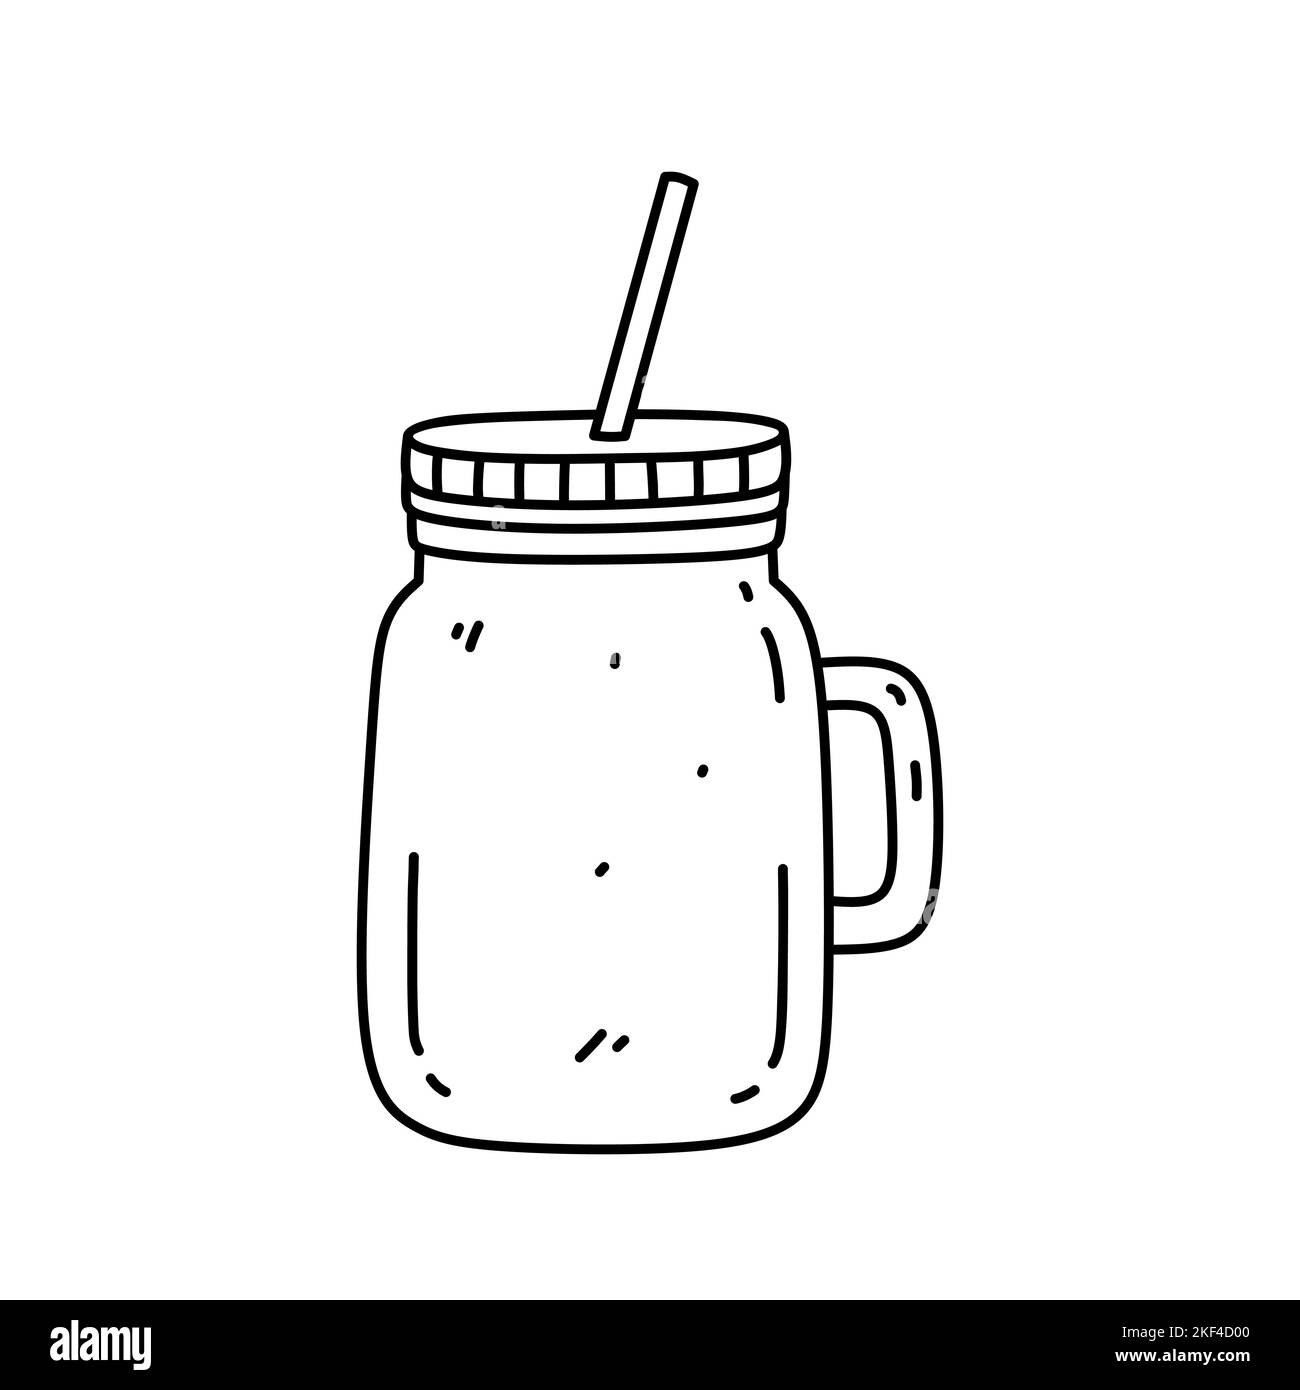 Glass mason jar with handle and drinking straw isolated on white background. Vector hand-drawn illustration in doodle style. Perfect for decorations, logo, various designs. Stock Vector